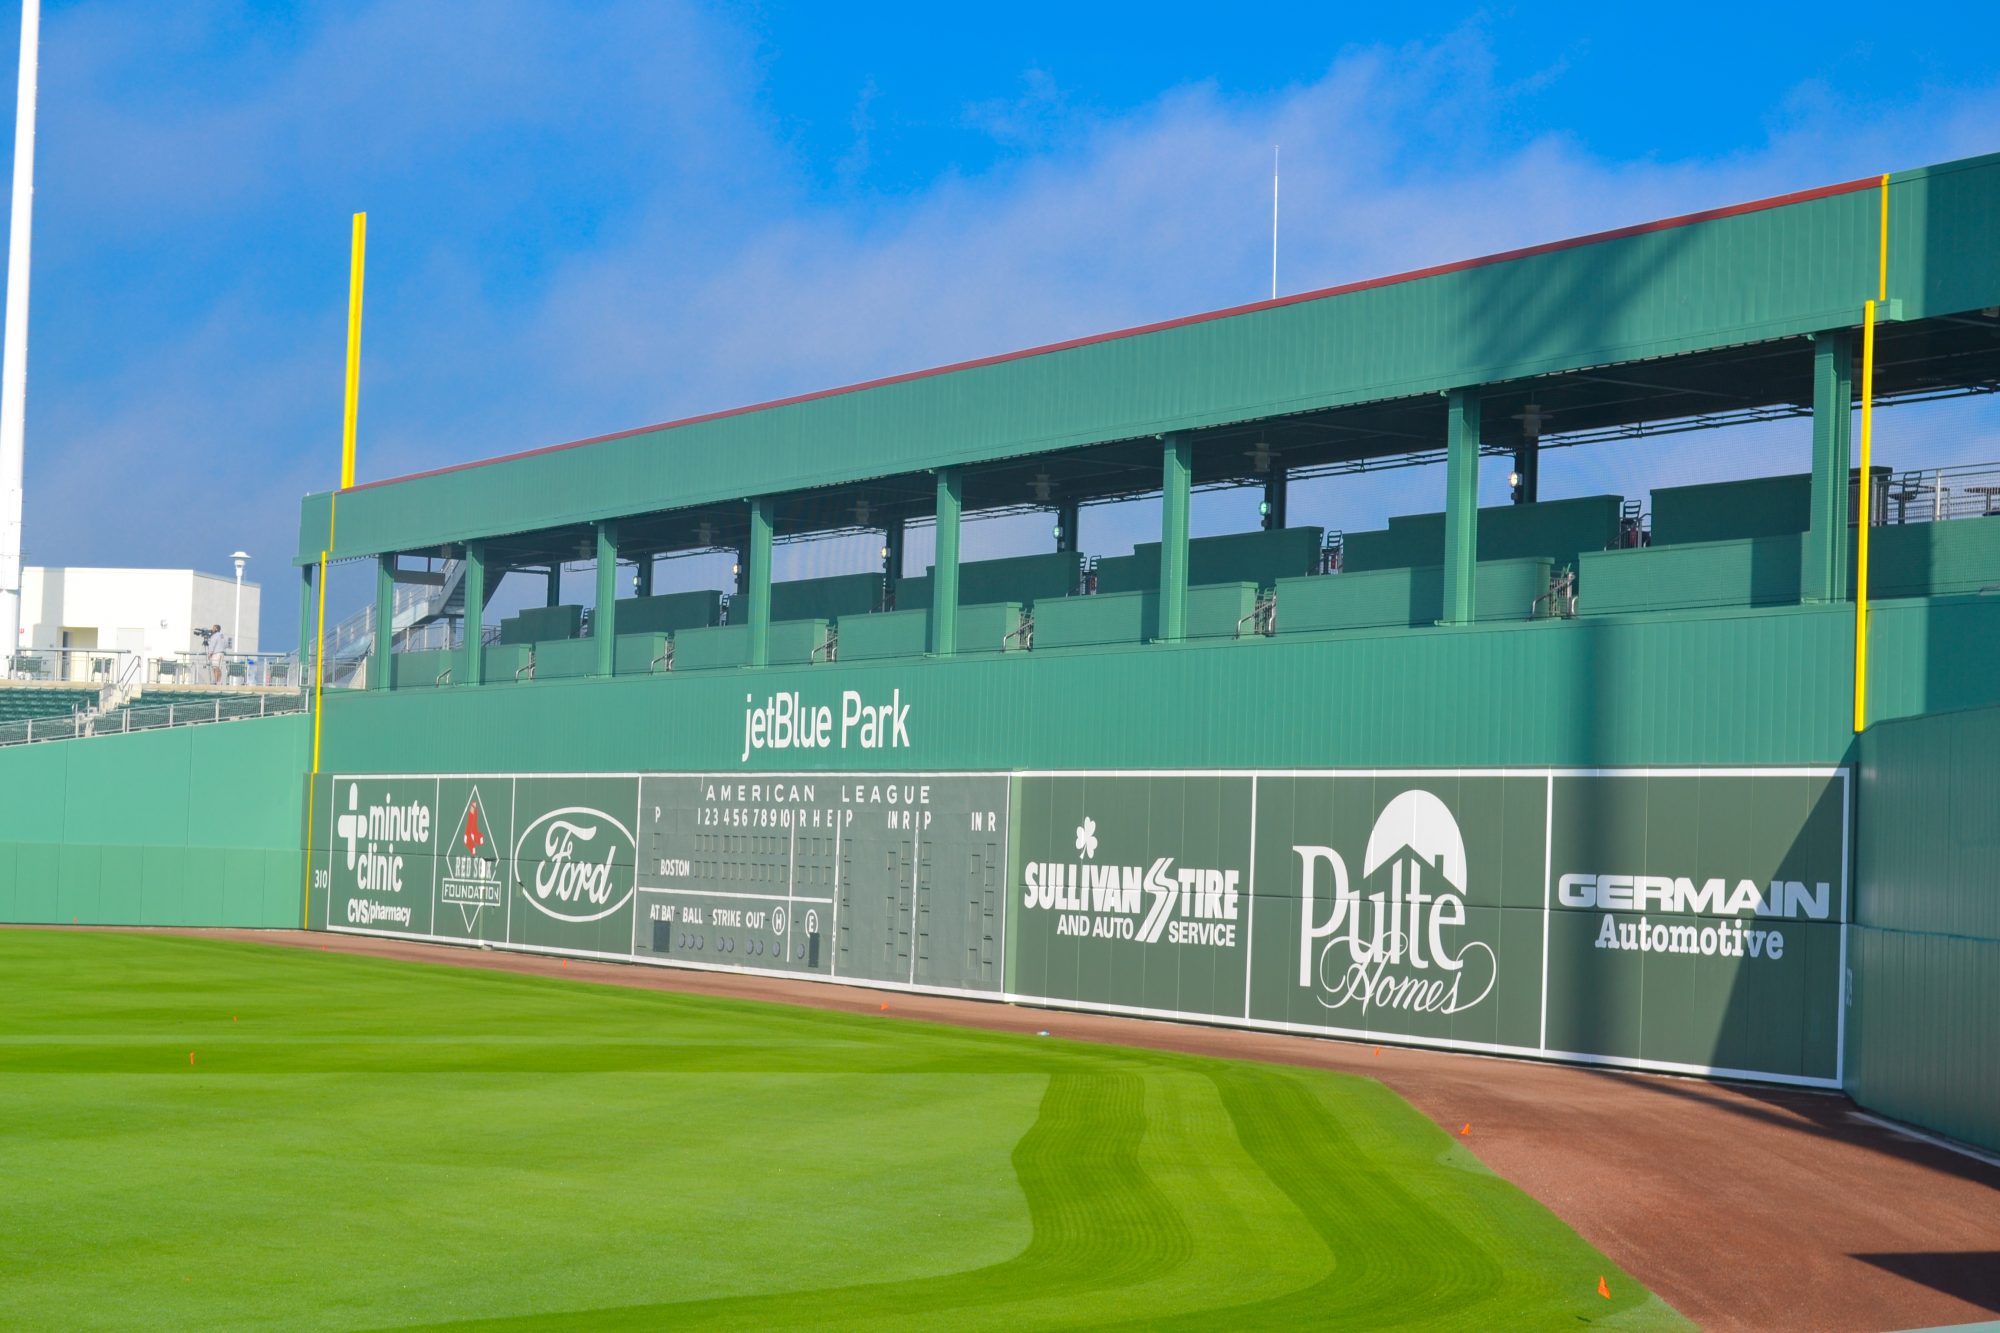 jetBlue Park at Fenway South Review - Boston Red Sox - Ballpark